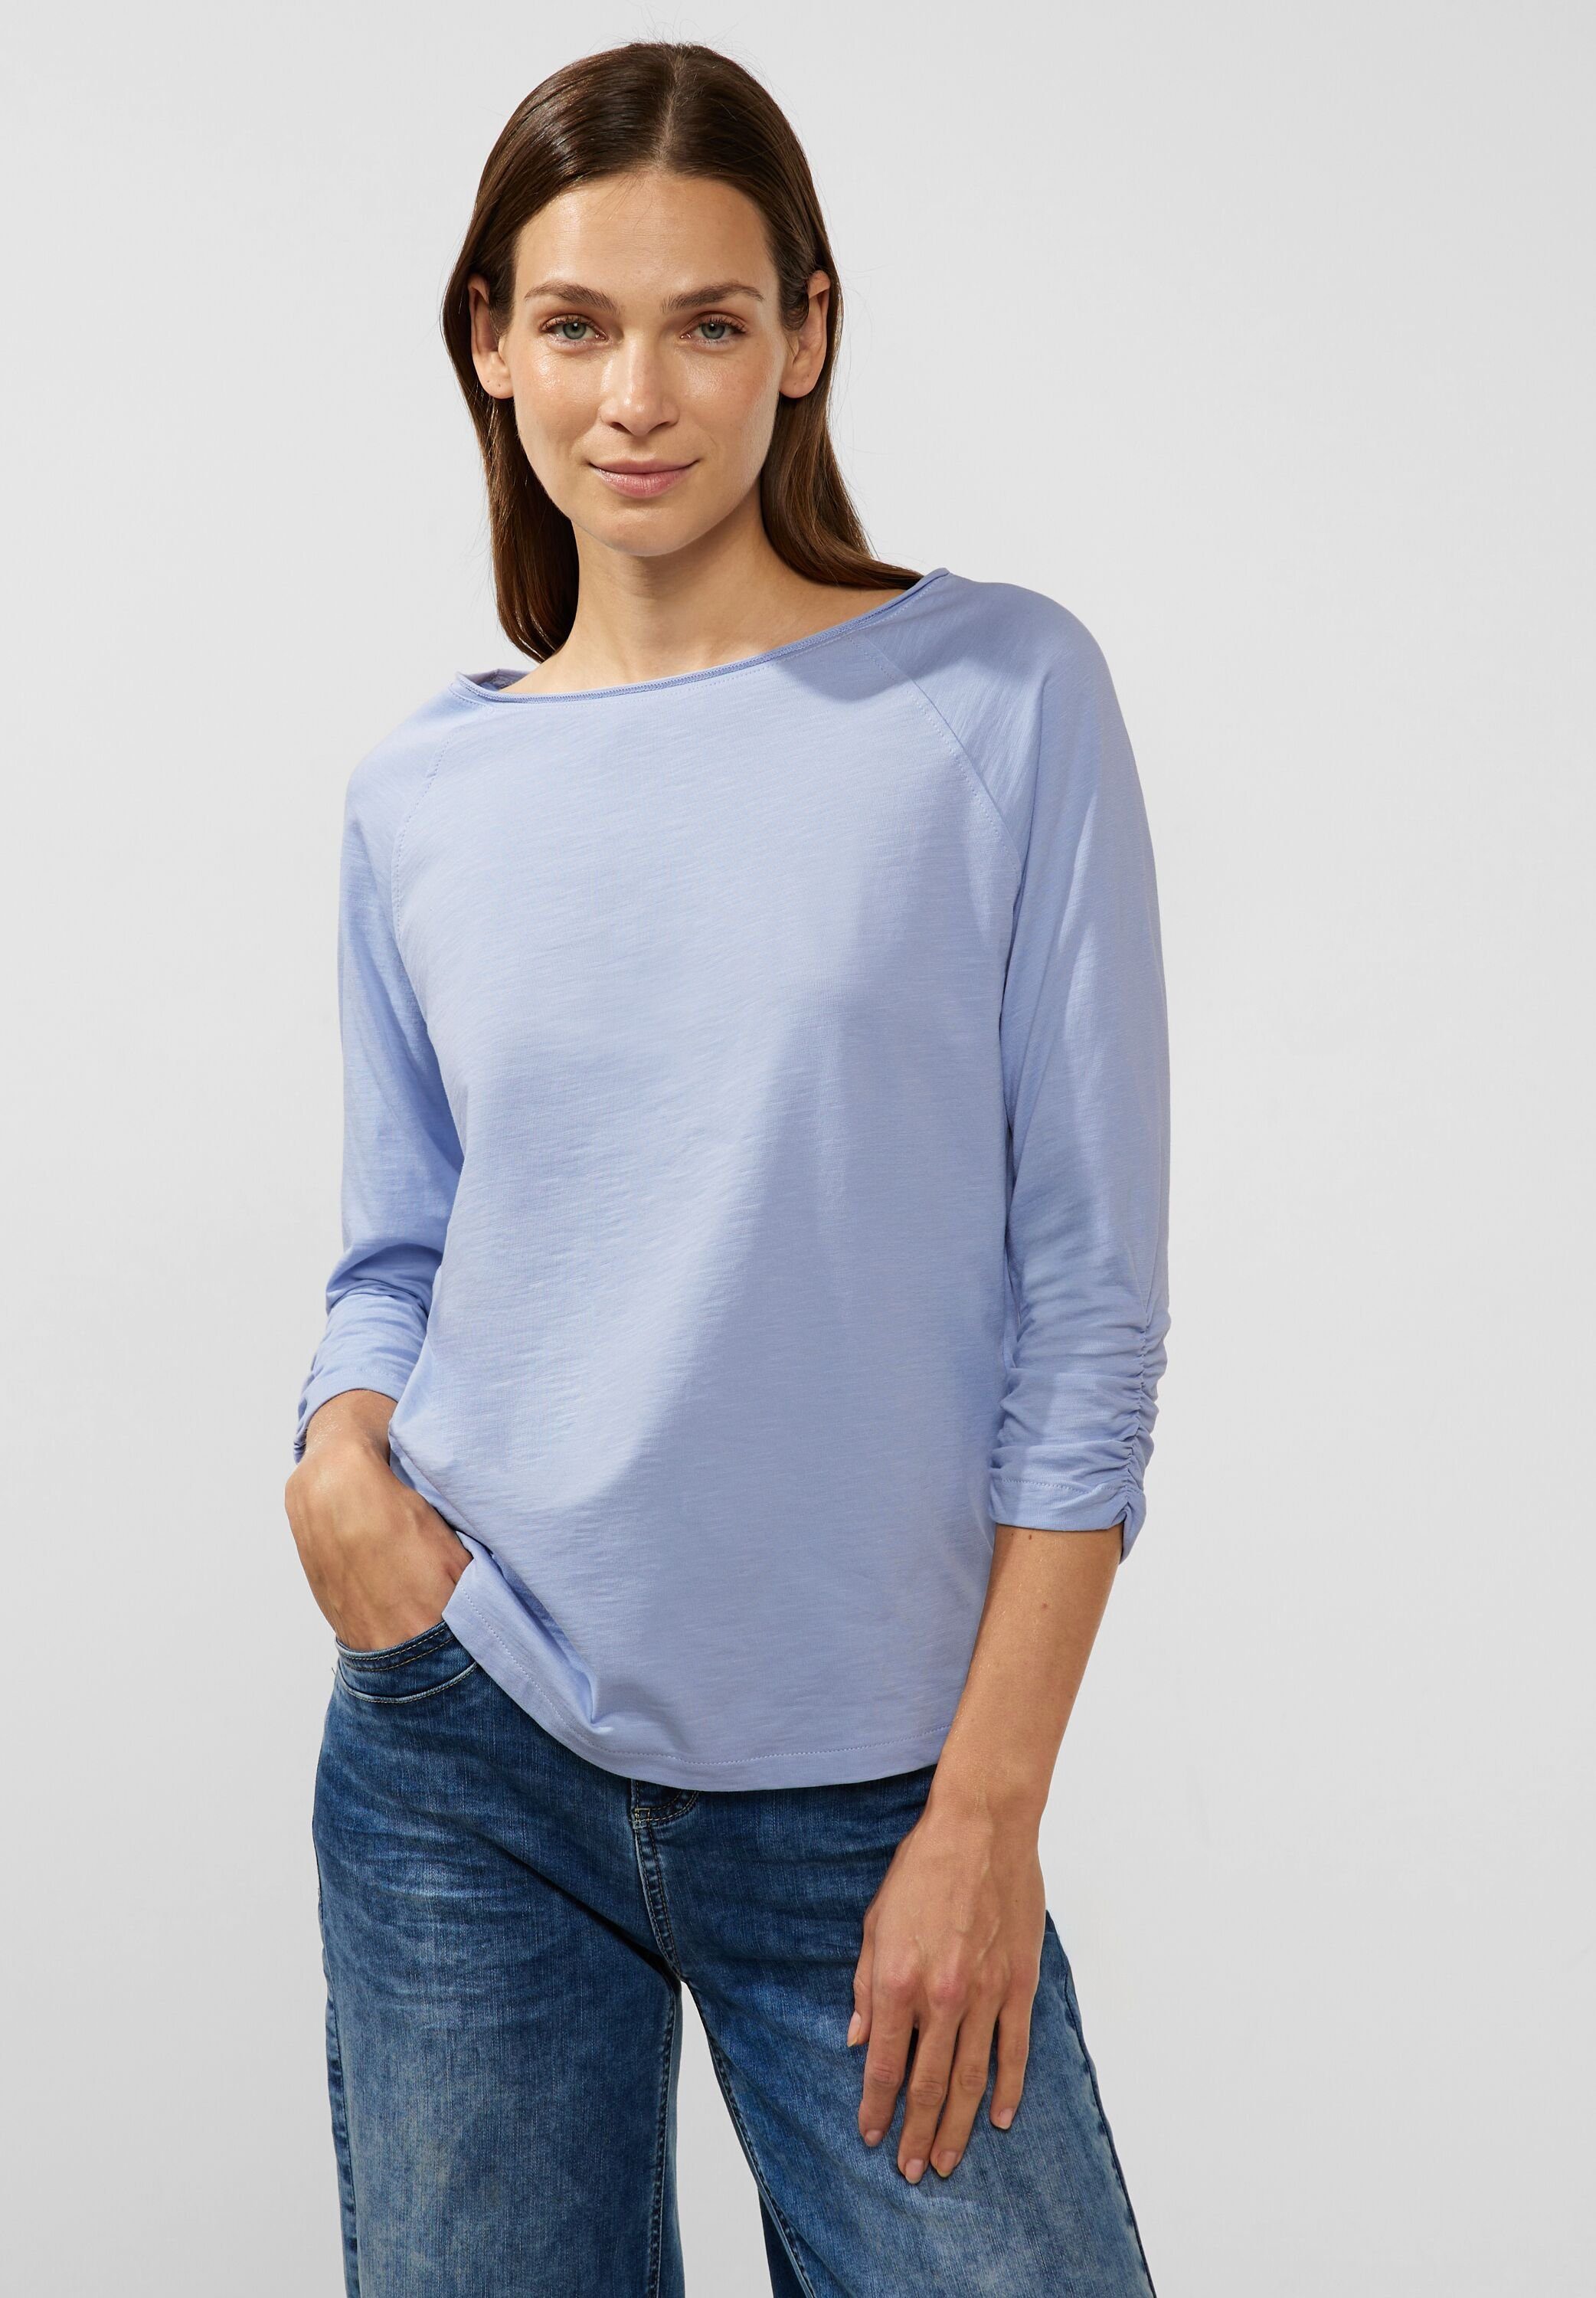 mid 3/4-Arm-Shirt ONE STREET Unifarbe blue sunny in